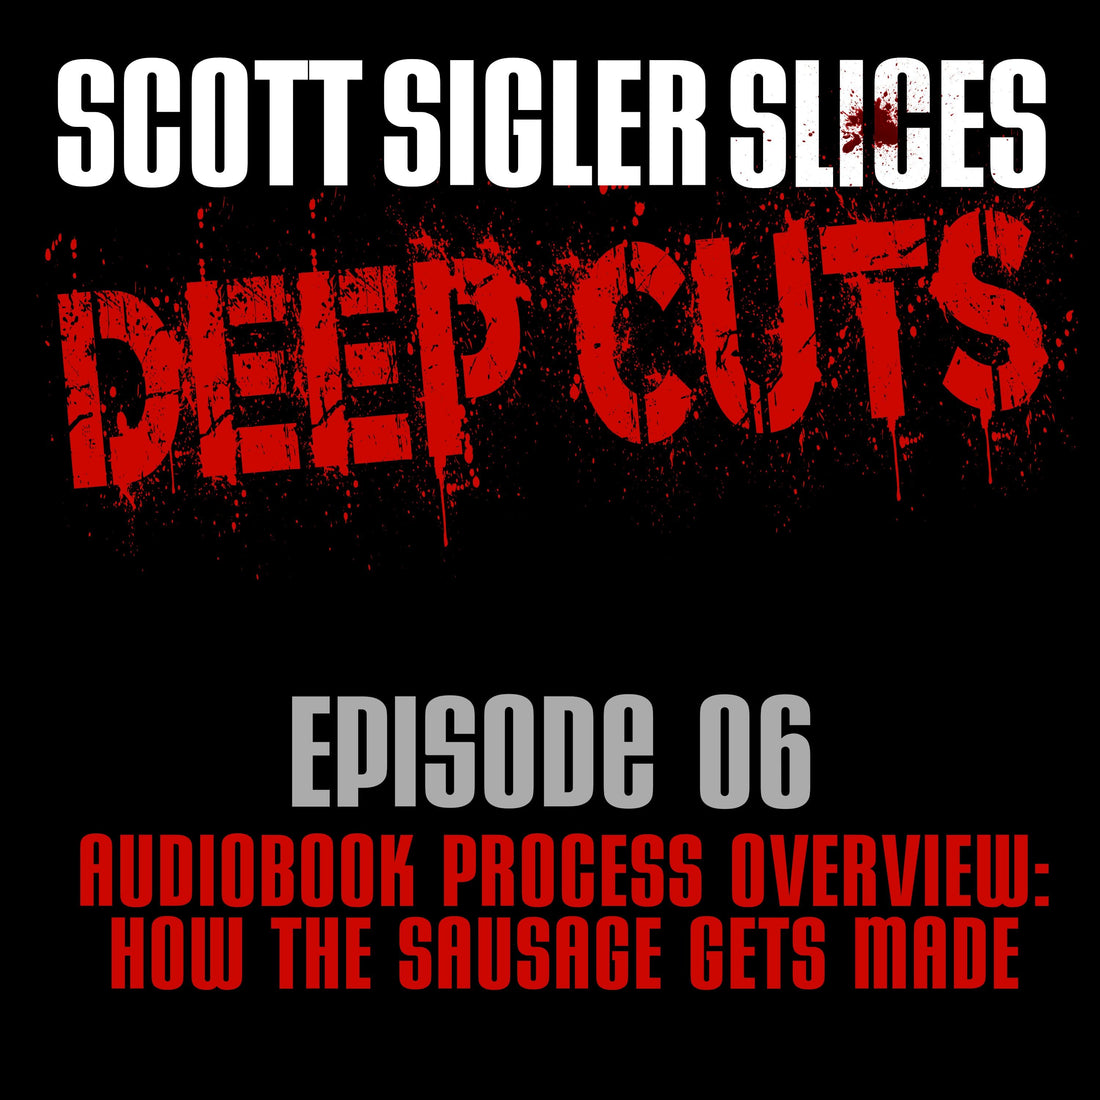 DEEP CUTS Episode 6 Audiobook Process Overview - How The Sausage Gets Made